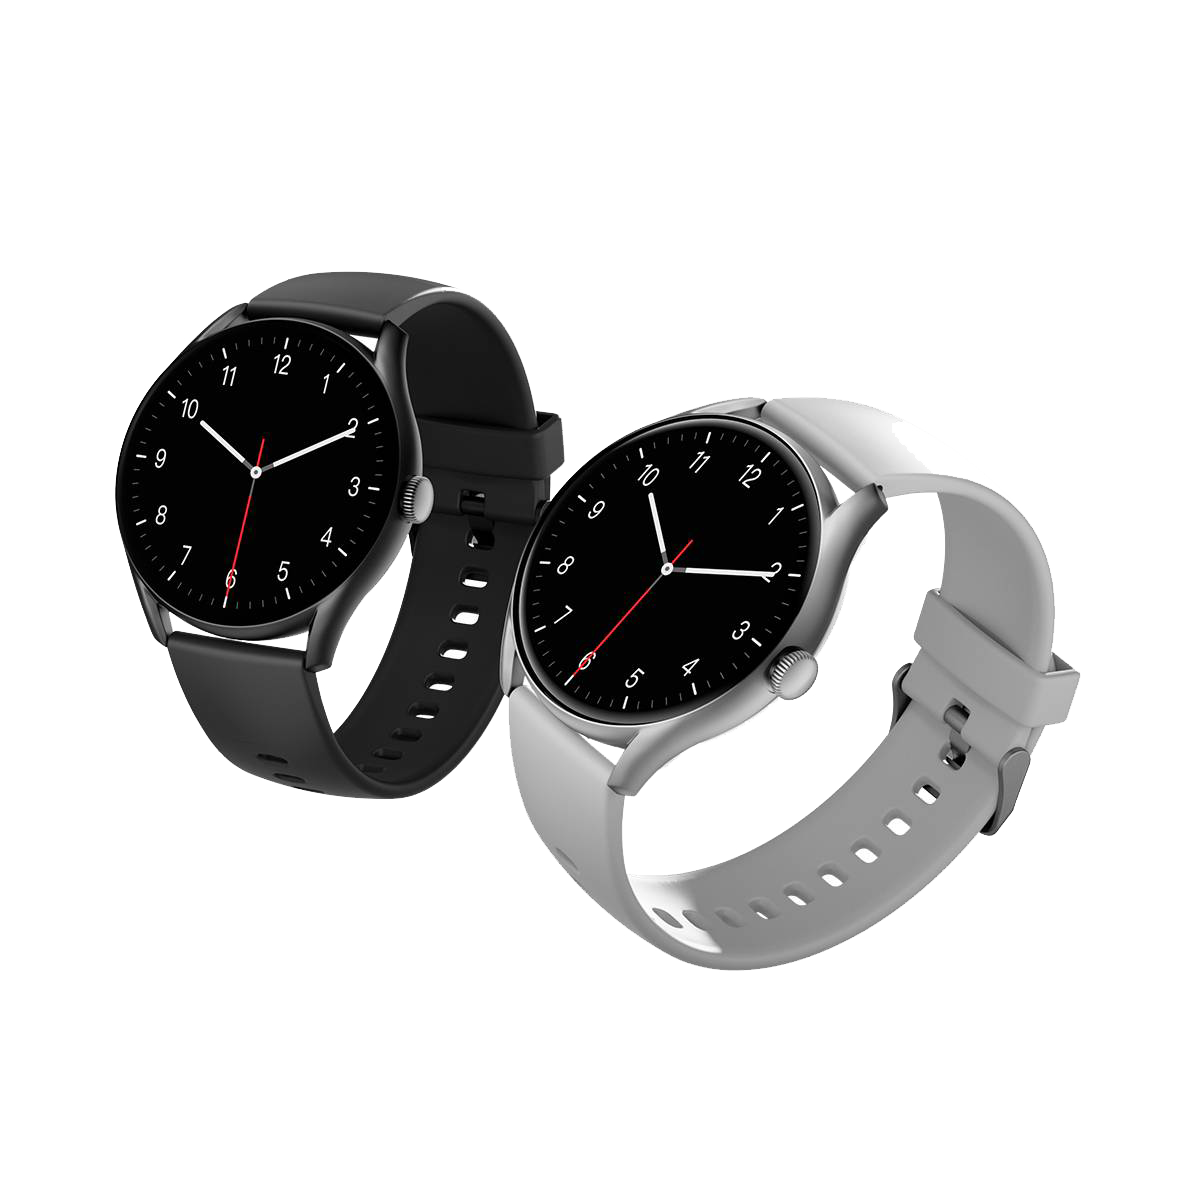 QCY Smart Watches GT